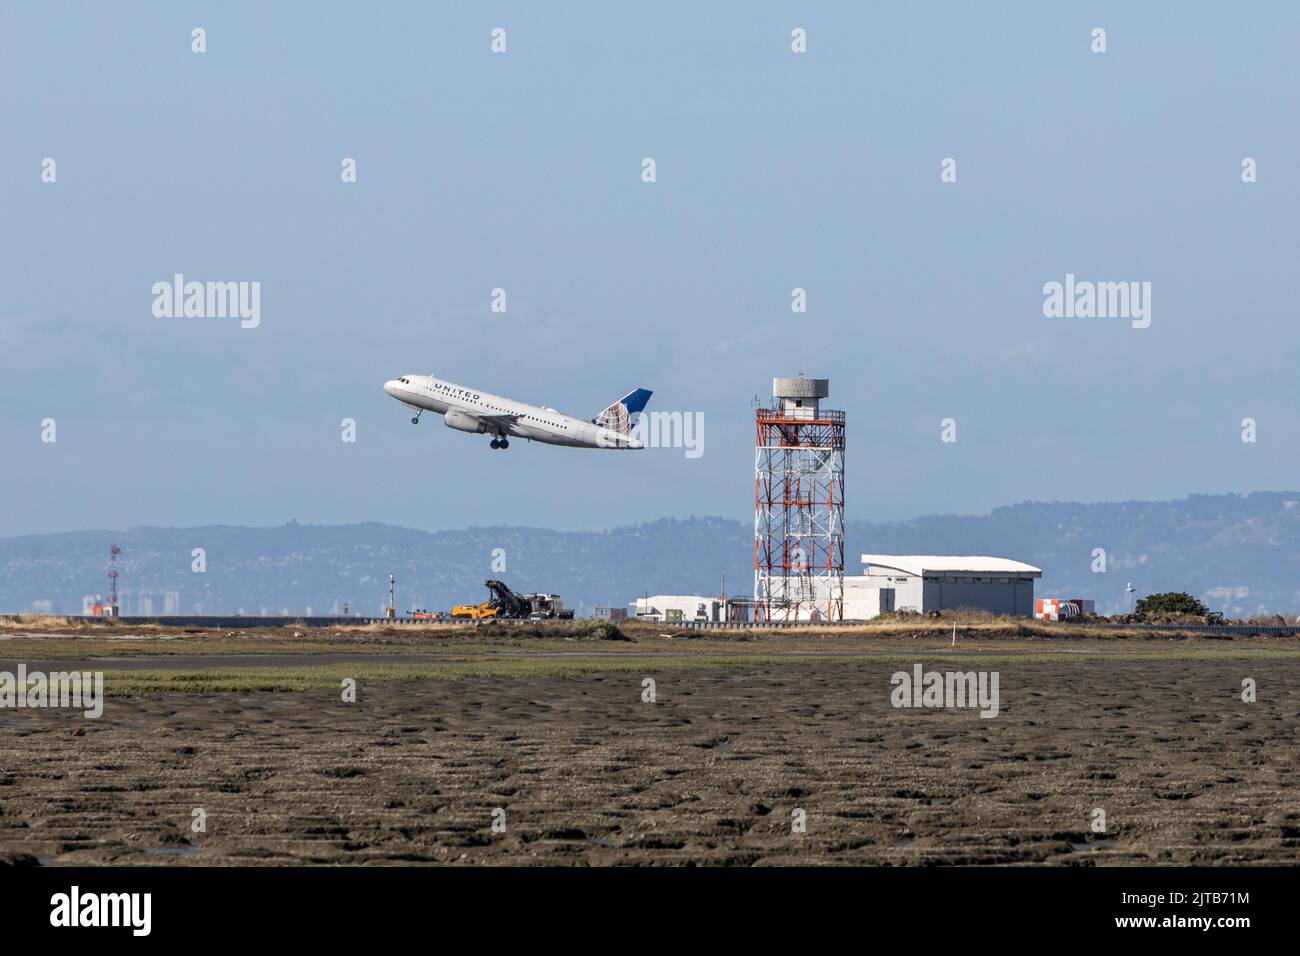 A United State airlines flight takes off over the airport in San Francisco Stock Photo